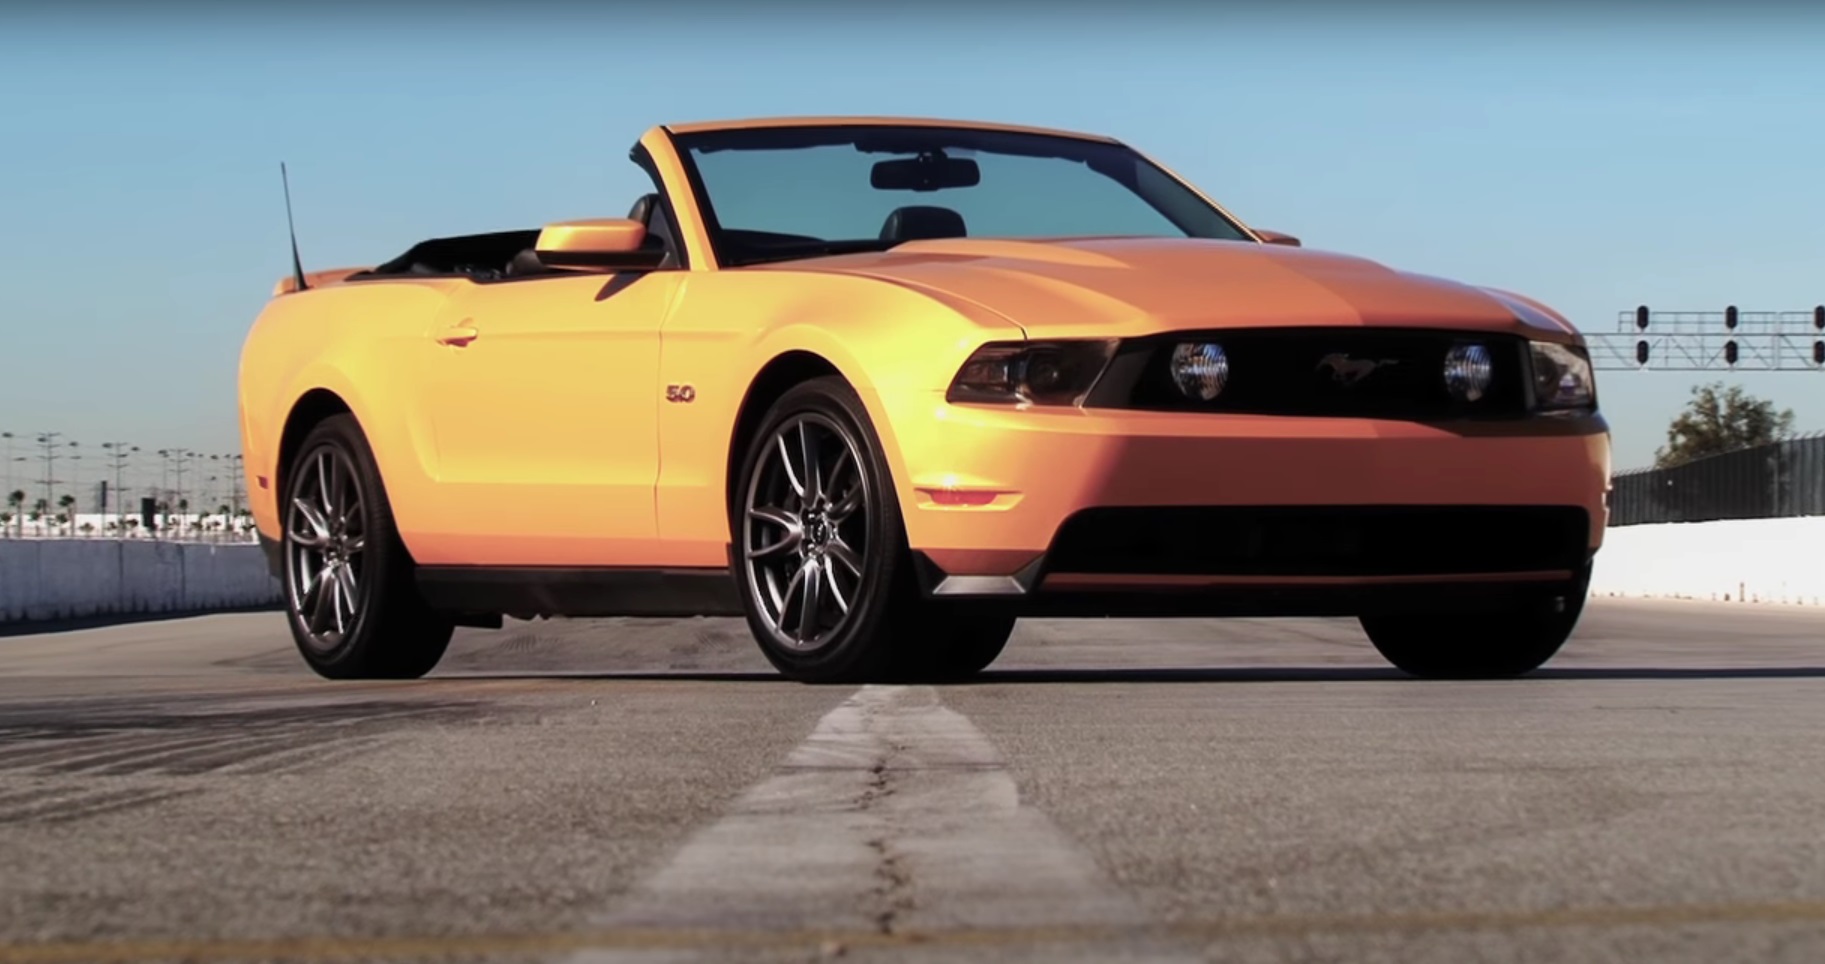 Video: 2011 Ford Mustang GT Convertible - First Road Test